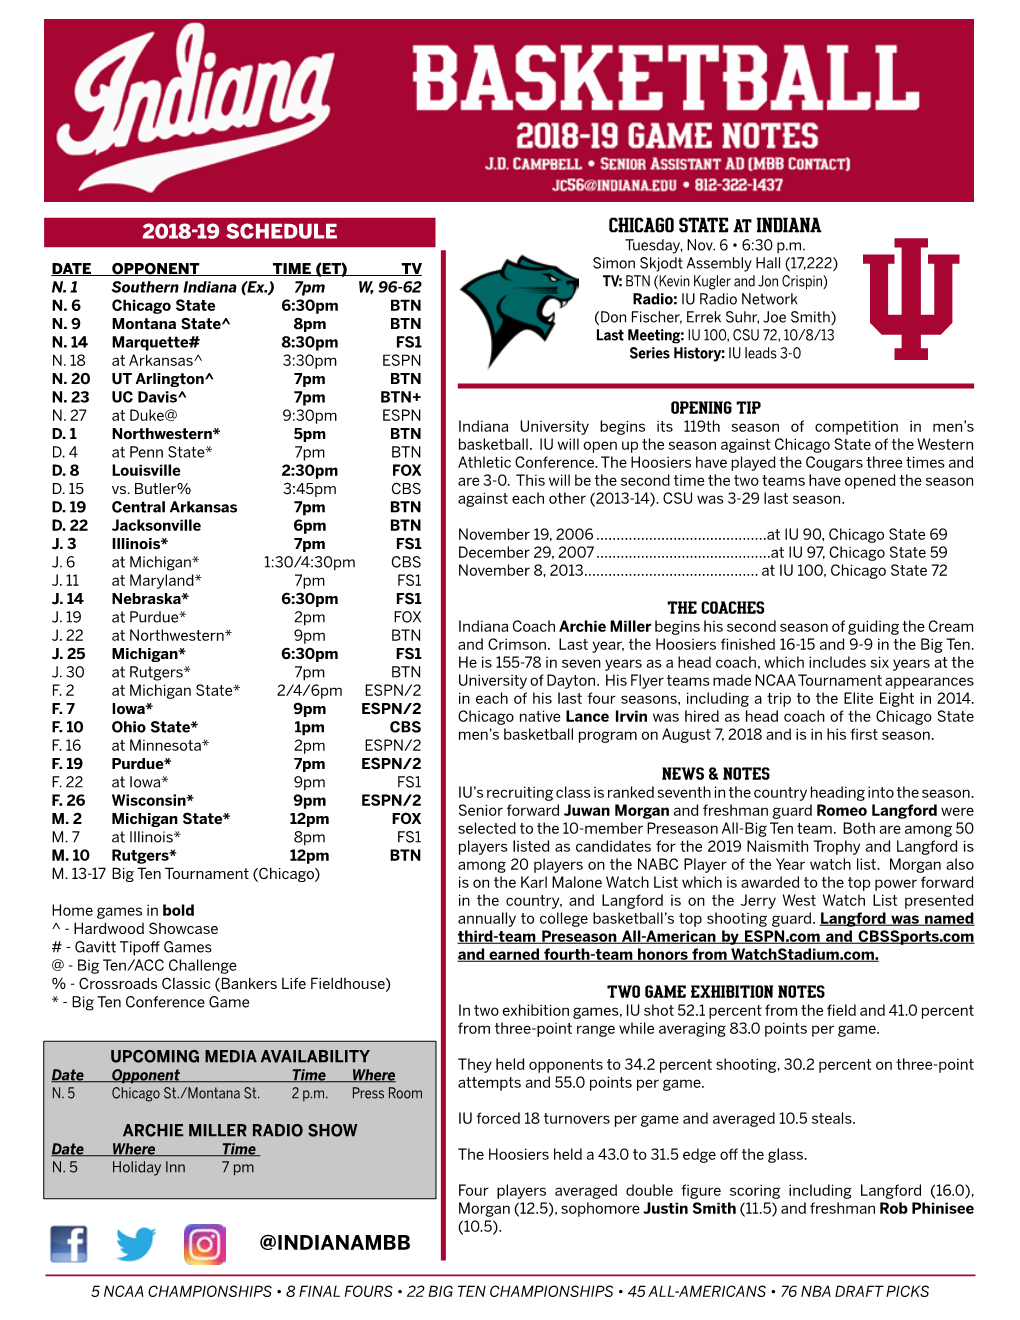 @INDIANAMBB 2018-19 SCHEDULE CHICAGO STATE at INDIANA